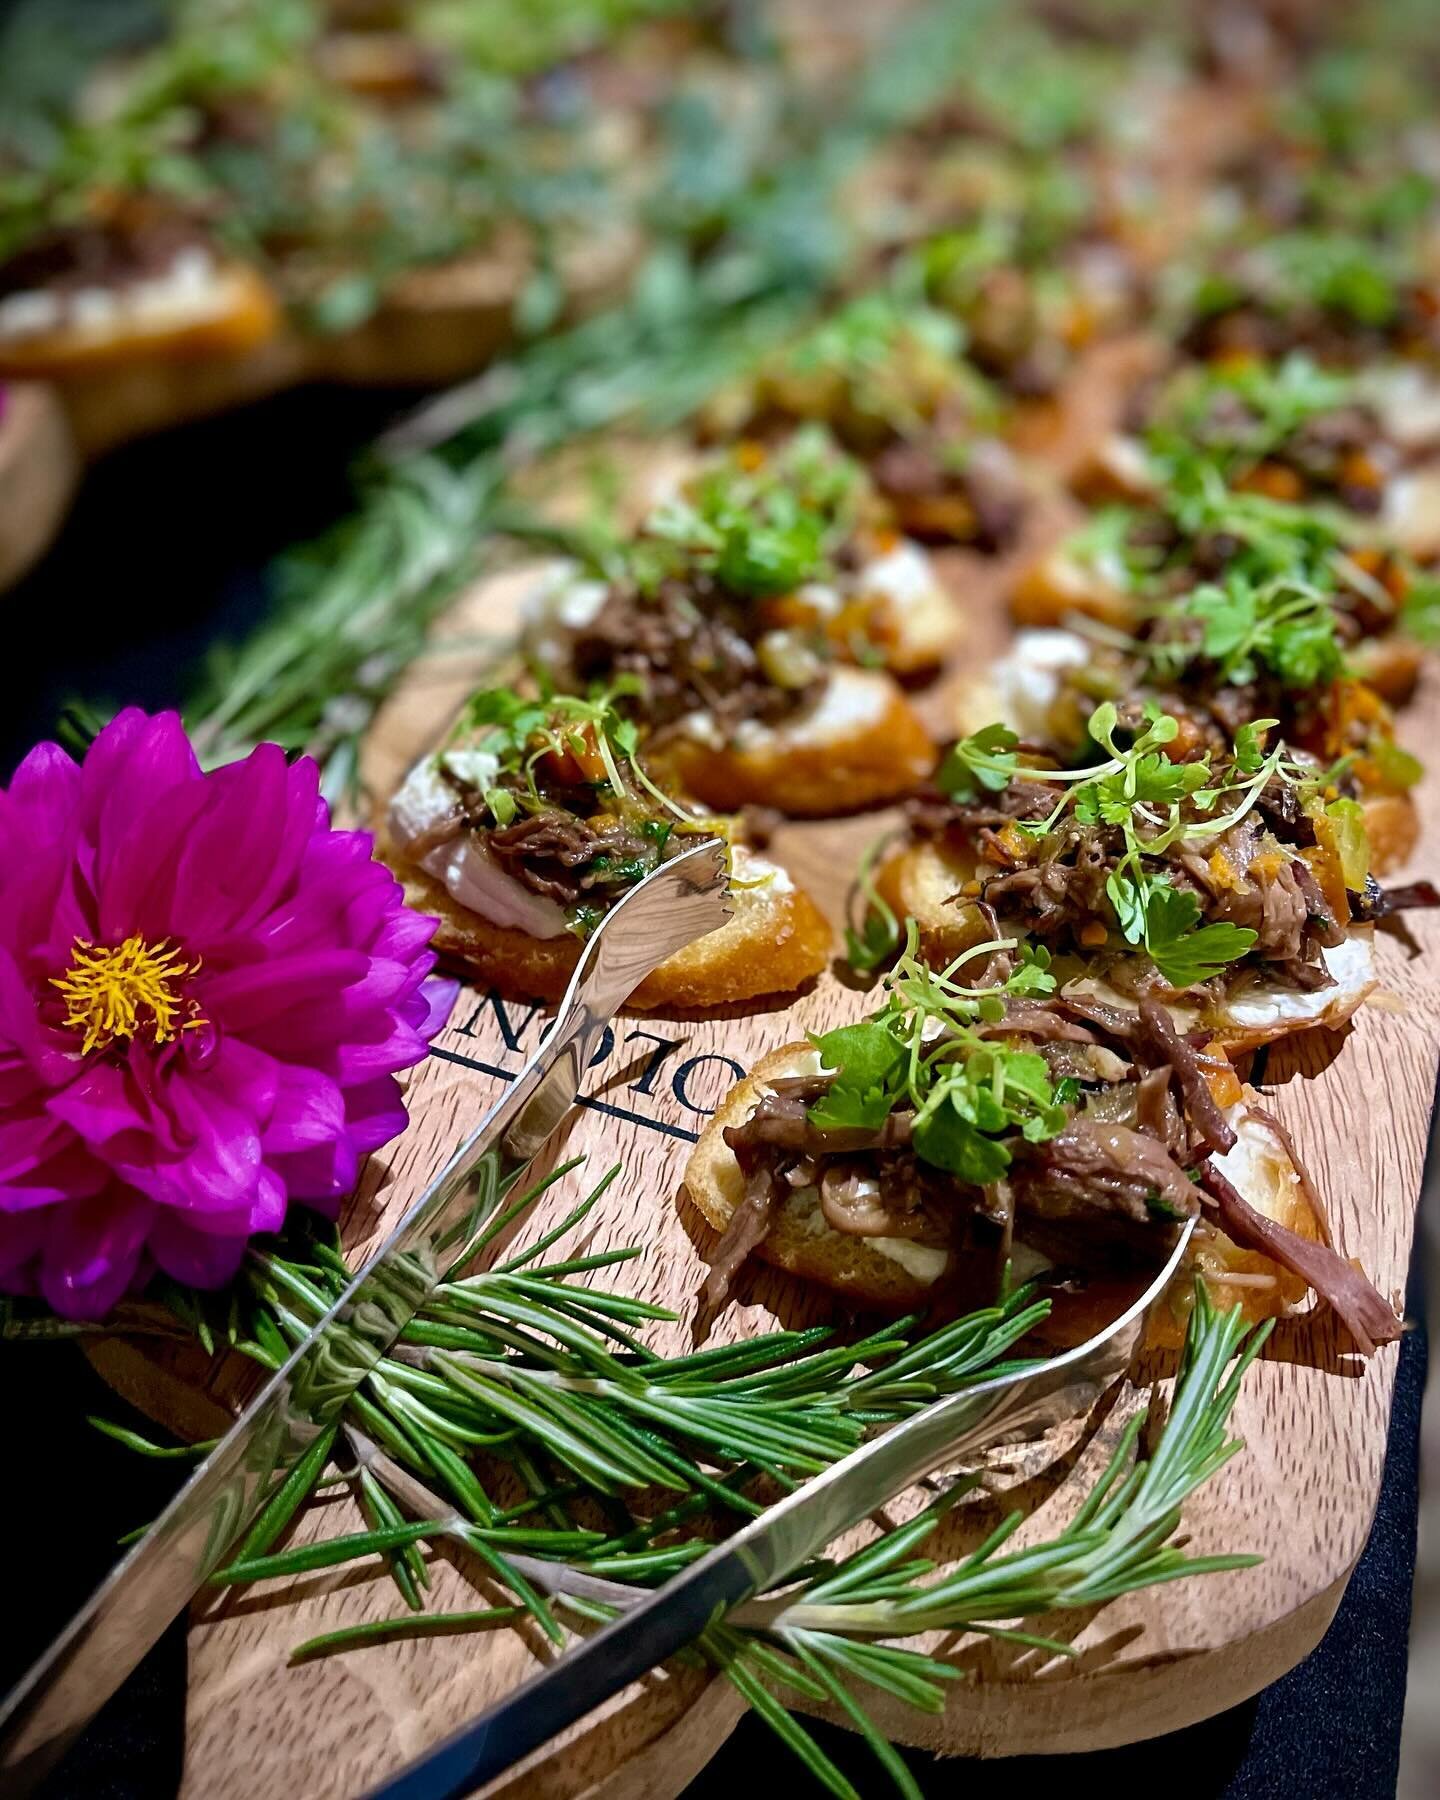 Braised Short Rib, Whipped Goat Cheese, and Petite Mirepoix on Baguette - a Chef @hermannkev favorite.

#wildwoodscatering #pghcatering #pghcaterer #pghchefs #shortribtoast #appetizersnacks #pghlocal #pgh #pittsburgh